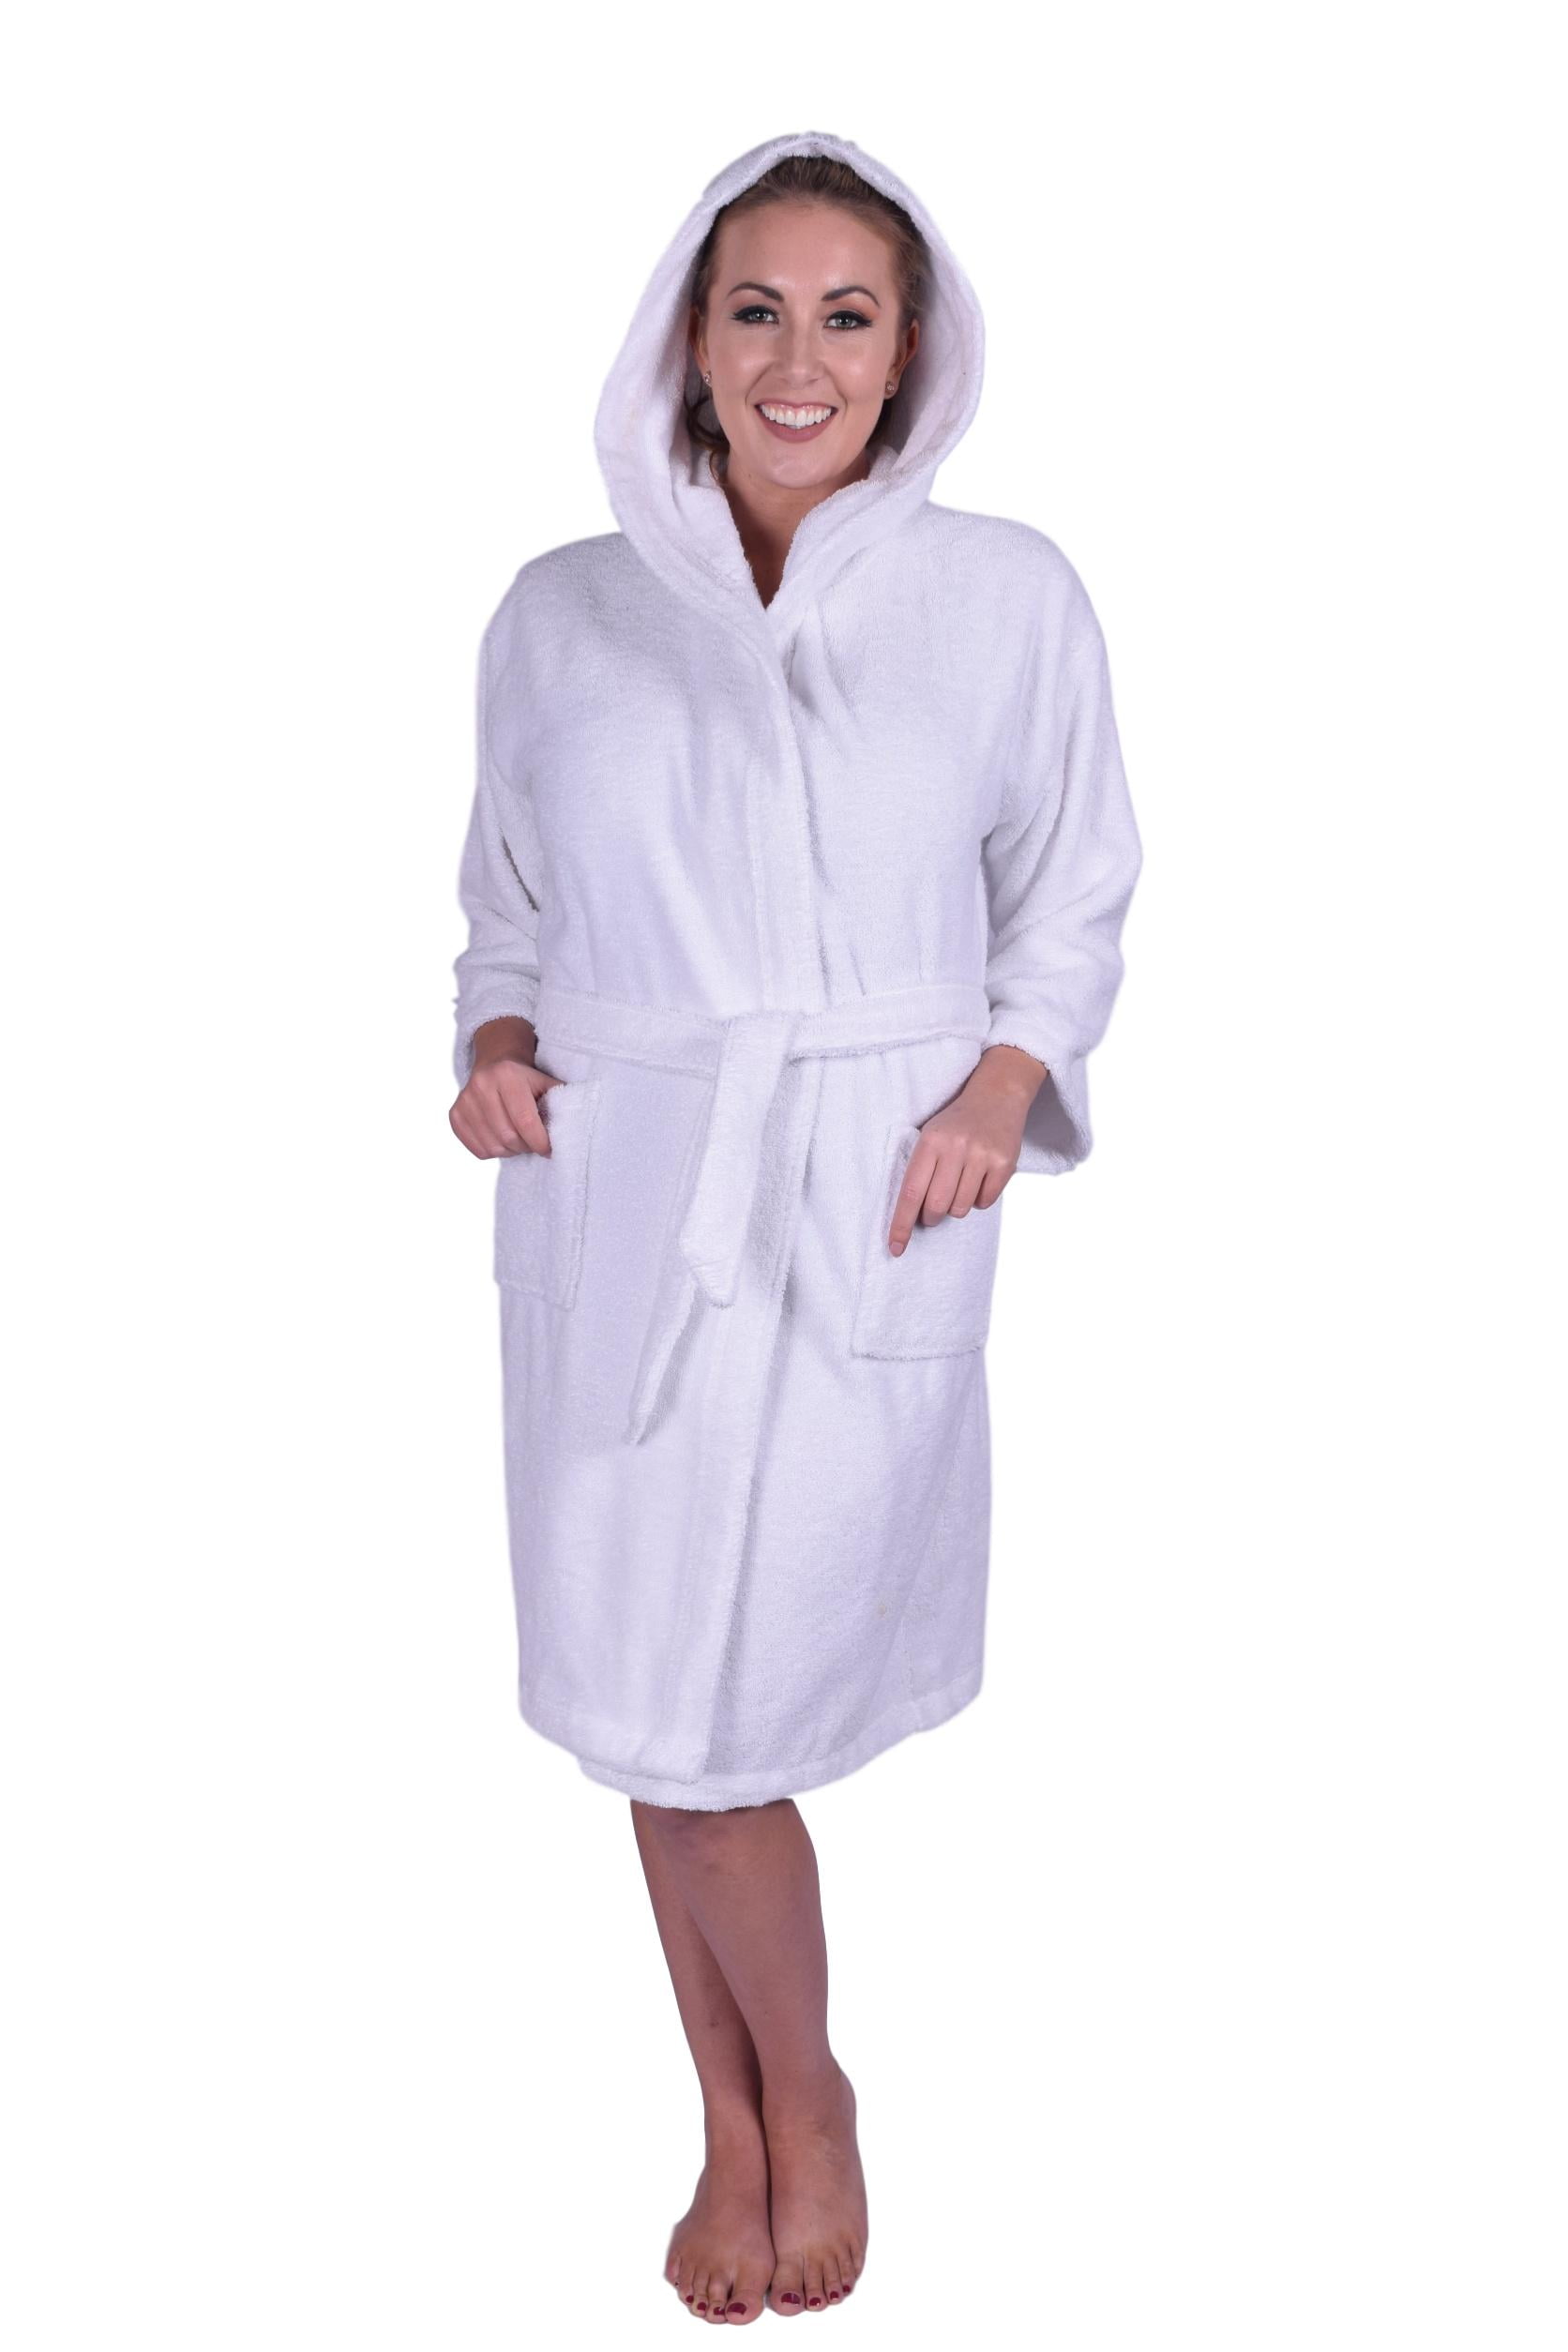 Best of Bath robes for teens